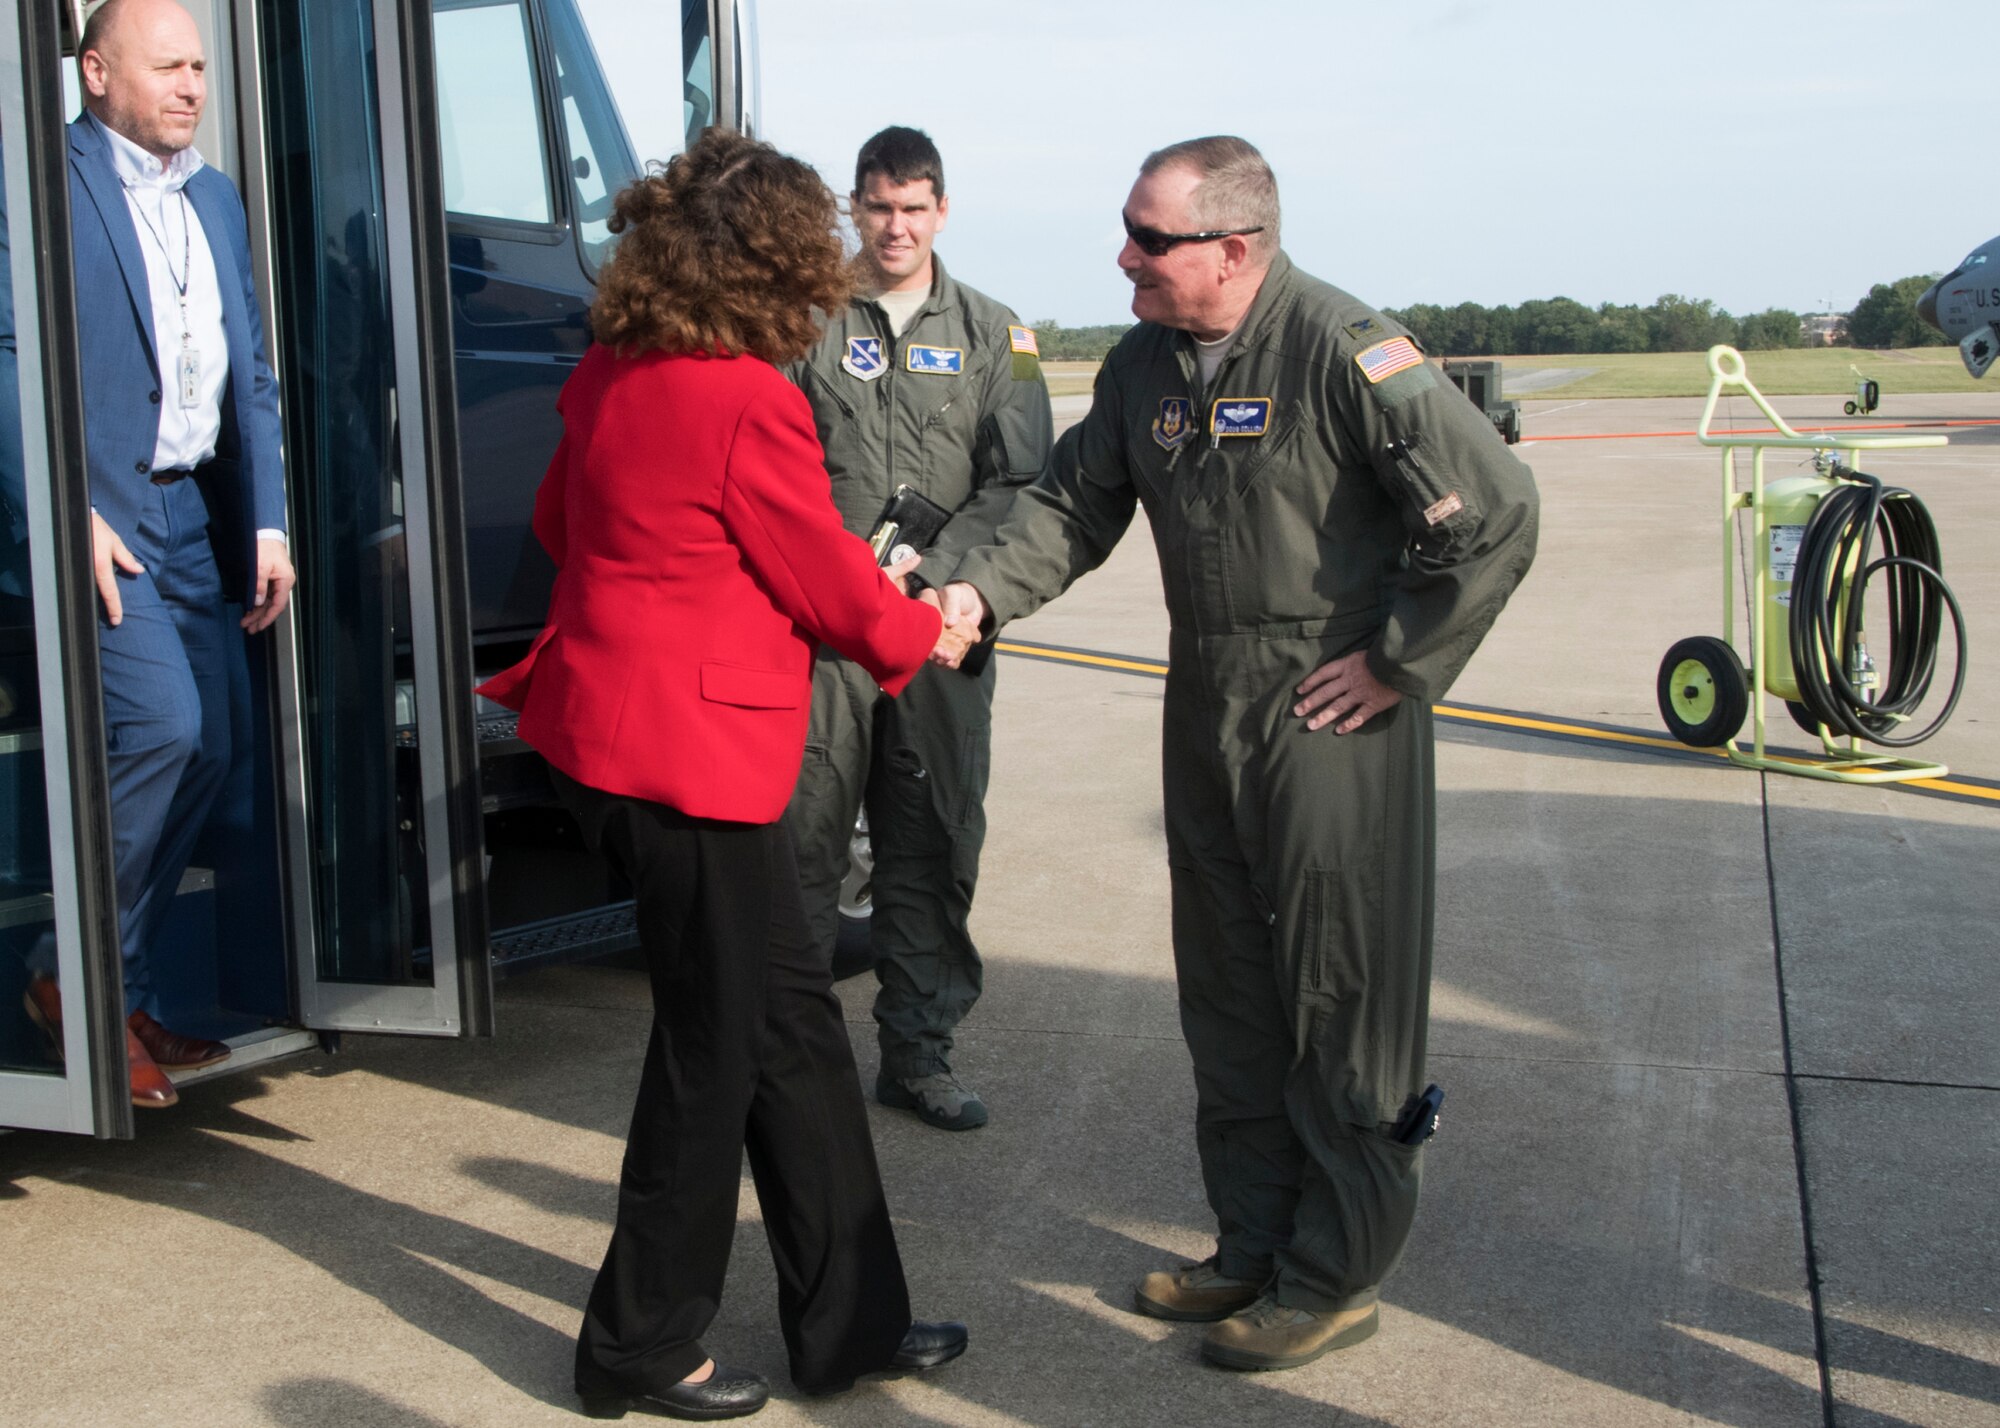 Col. Douglas Gullion, 459th Air Refueling Wing Commander, greets Ms. Michelle Lowesolis, Director, Defense Civilian Personnel Advisory Service, during a visit, Oct. 7, 2019, on Joint Base Andrews, Md. Lowesolis along with 18 members were briefed on the KC-135 Stratotanker and given a tour of the aircraft. (U.S. Air Force photo by Staff Sgt. Cierra Presentado/Released)